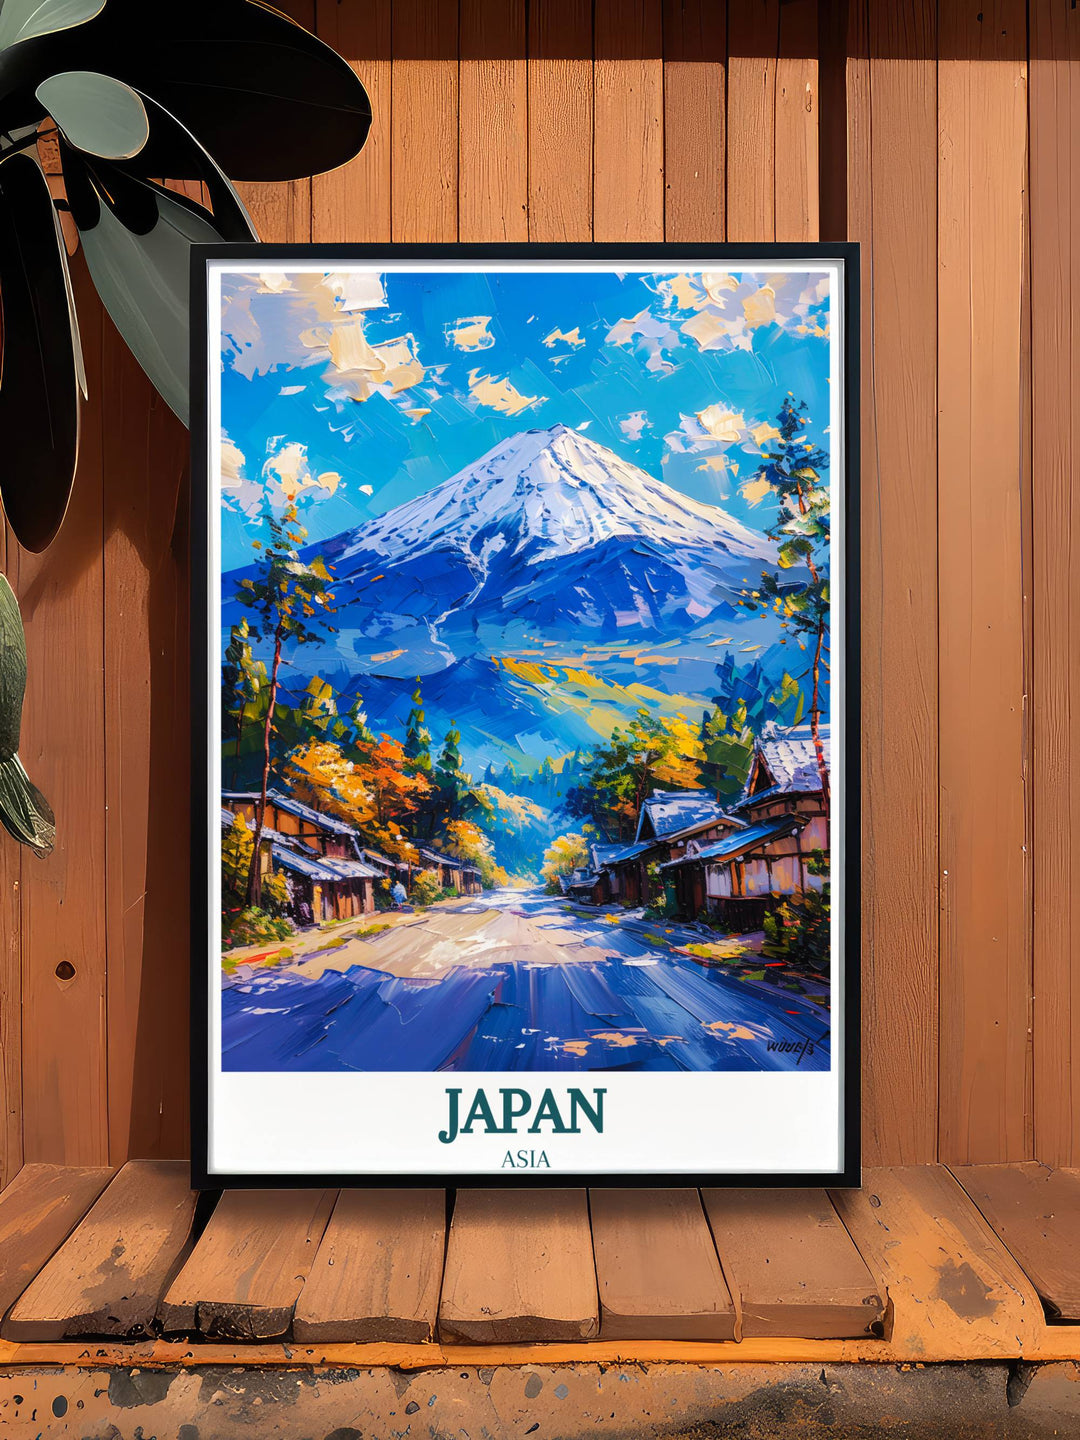 Tokyo travel gift featuring Japan's iconic landmark, Mount Fuji, a thoughtful present for art enthusiasts.